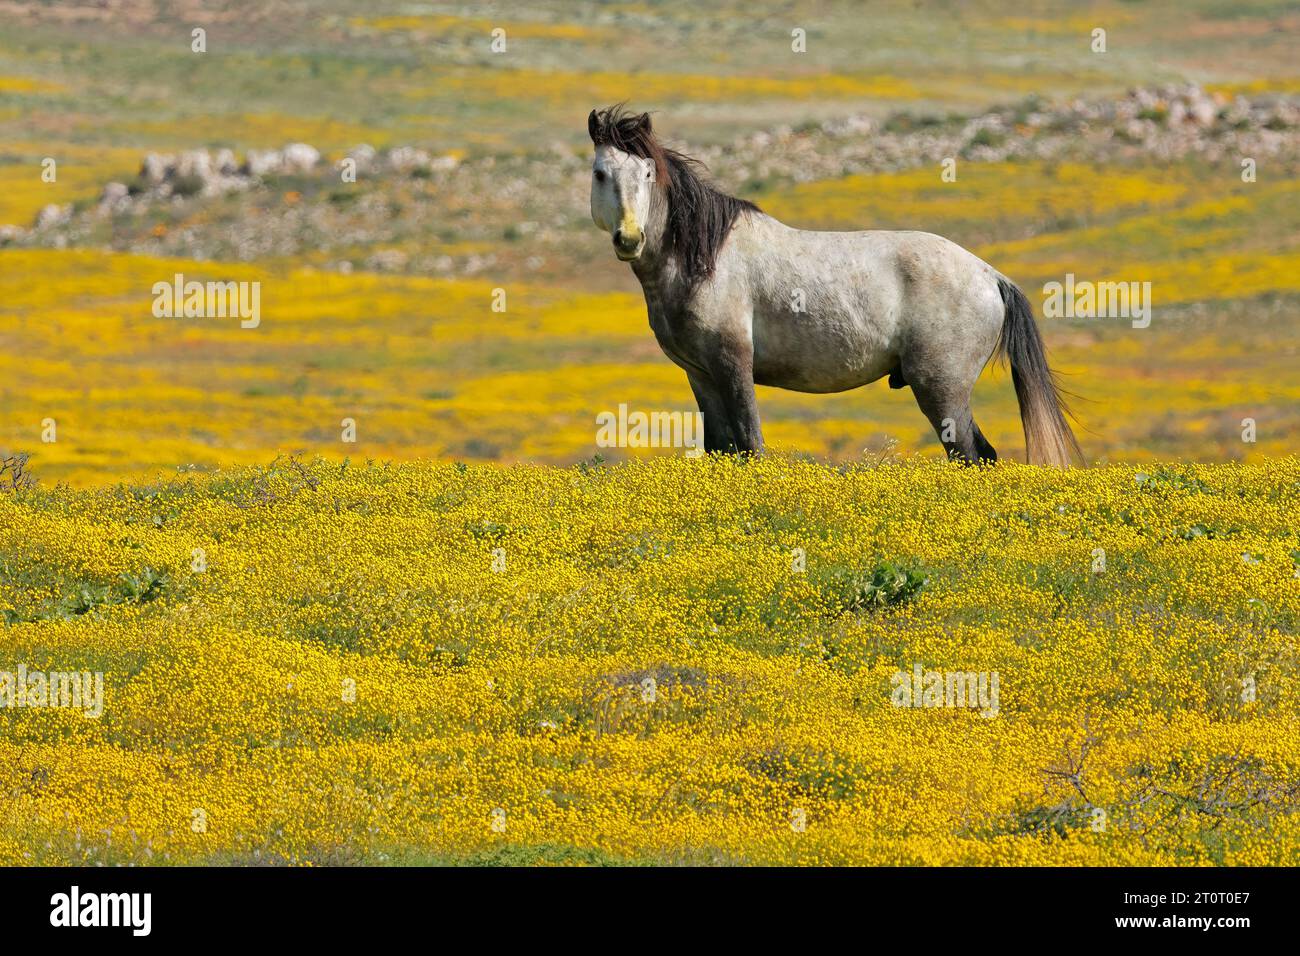 A free-range horse standing in a field with yellow wild flowers, Namaqualand, South Africa Stock Photo